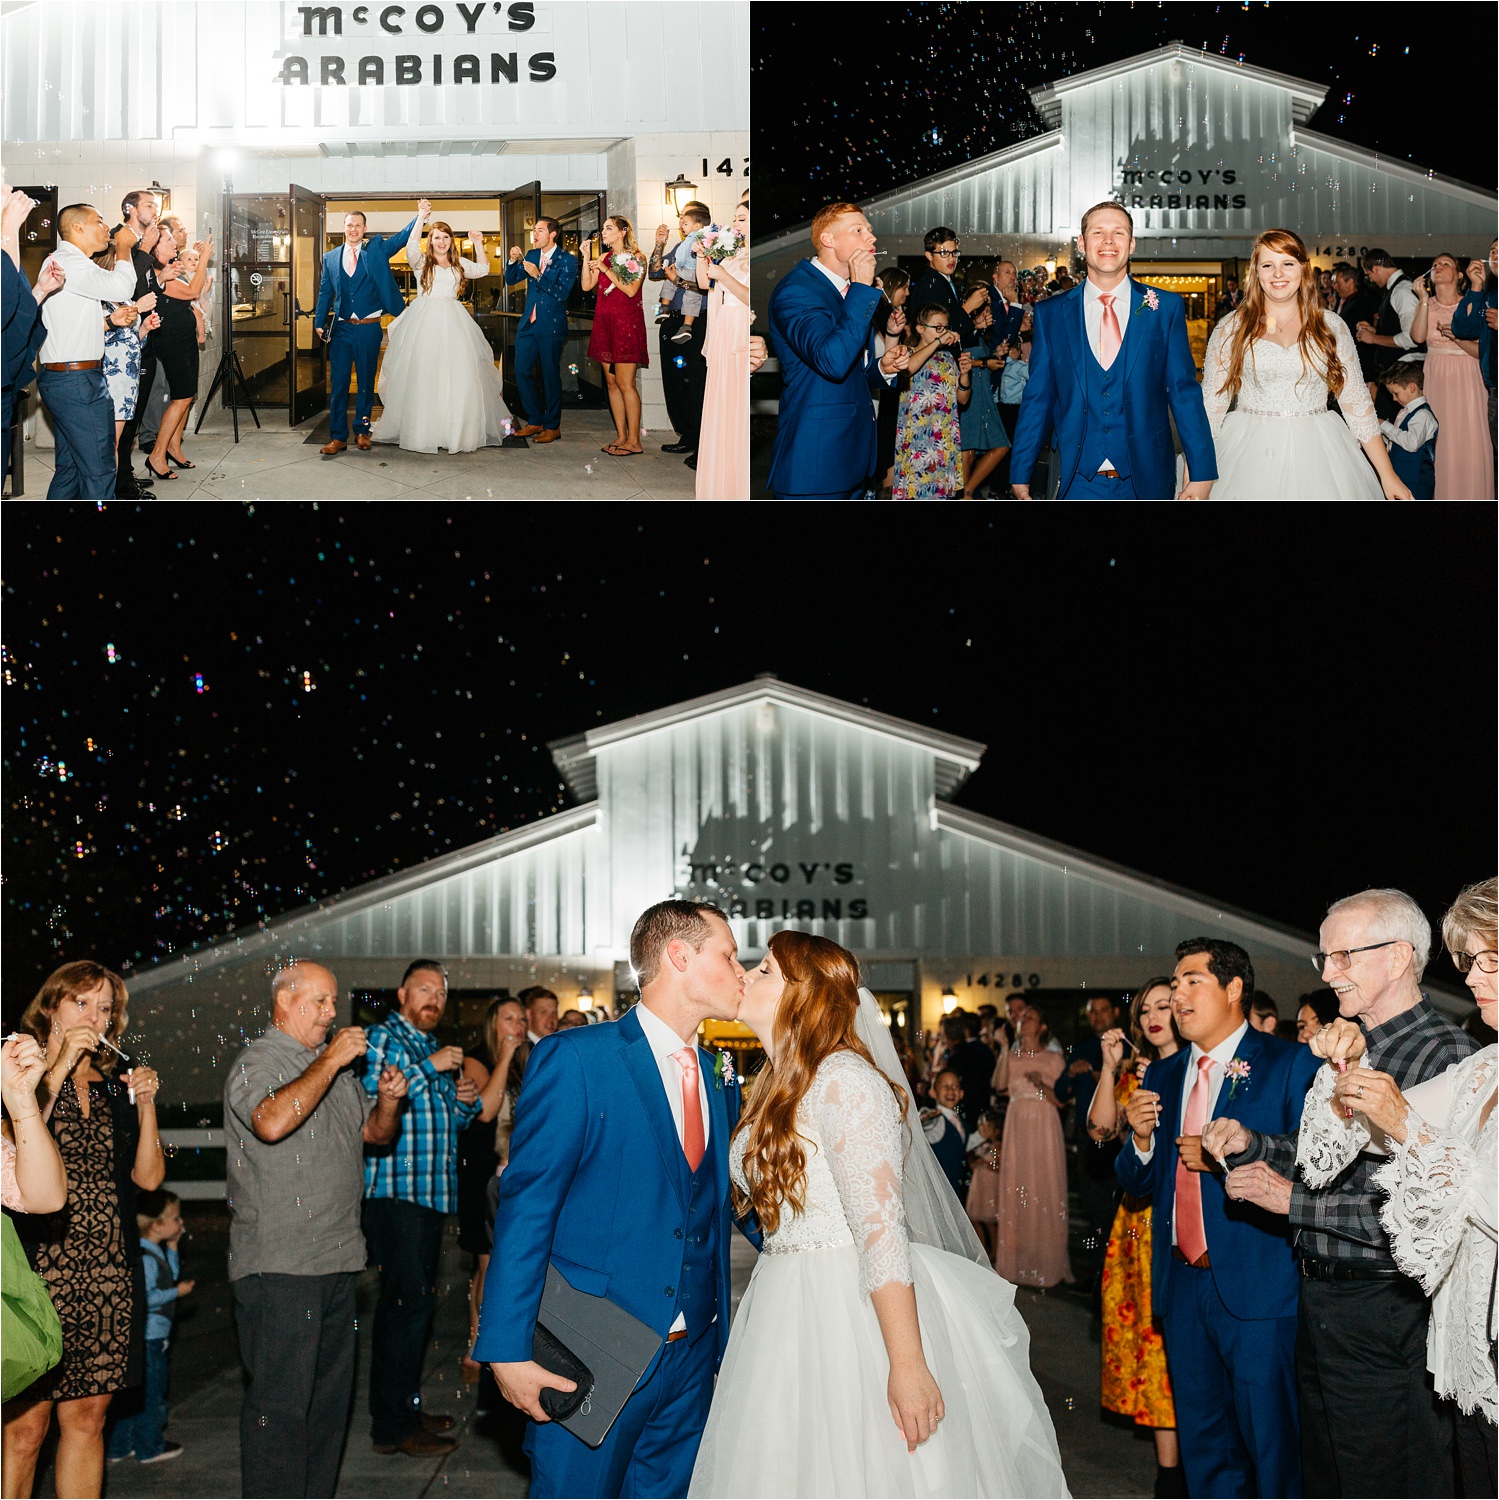 Bubble Exit - Grand Exit from Wedding Reception with bubbles - https://brittneyhannonphotography.com